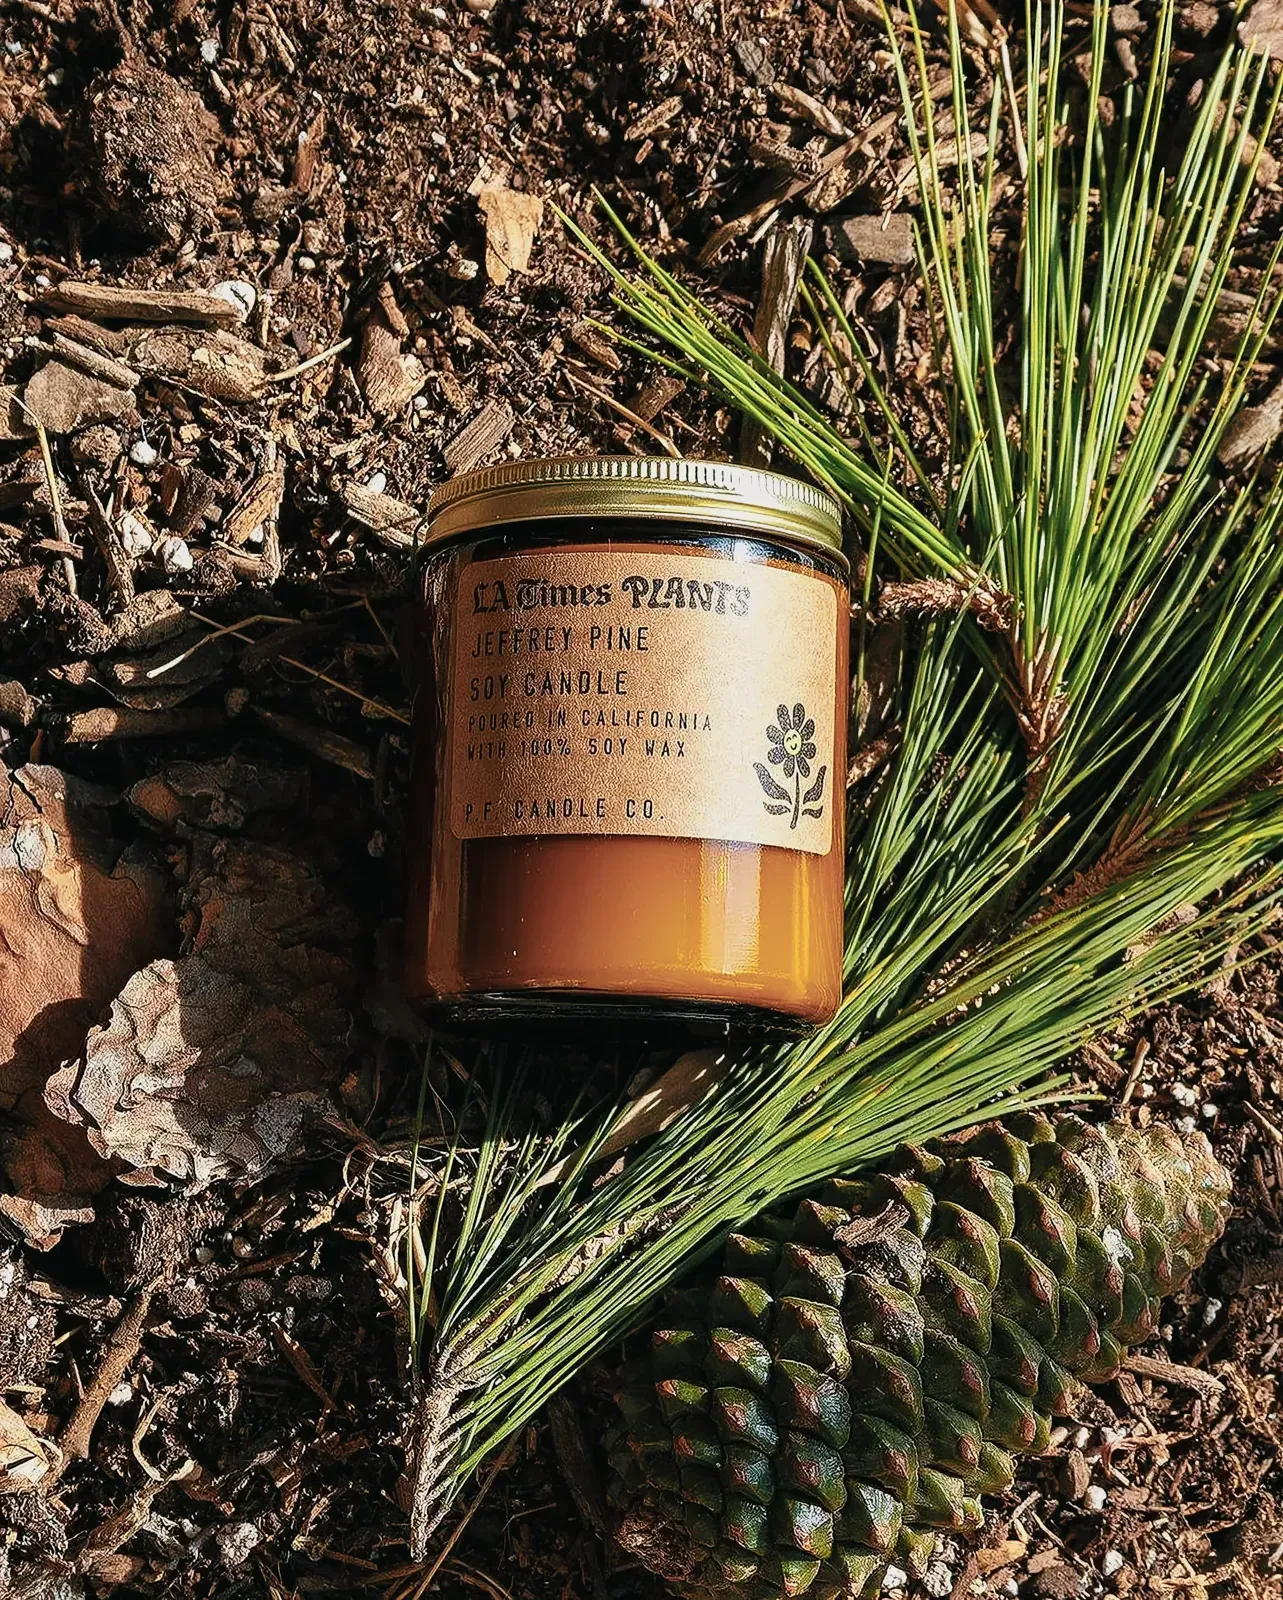 Lush outdoor setting with a candle in a jar surrounded by pine cones and plants